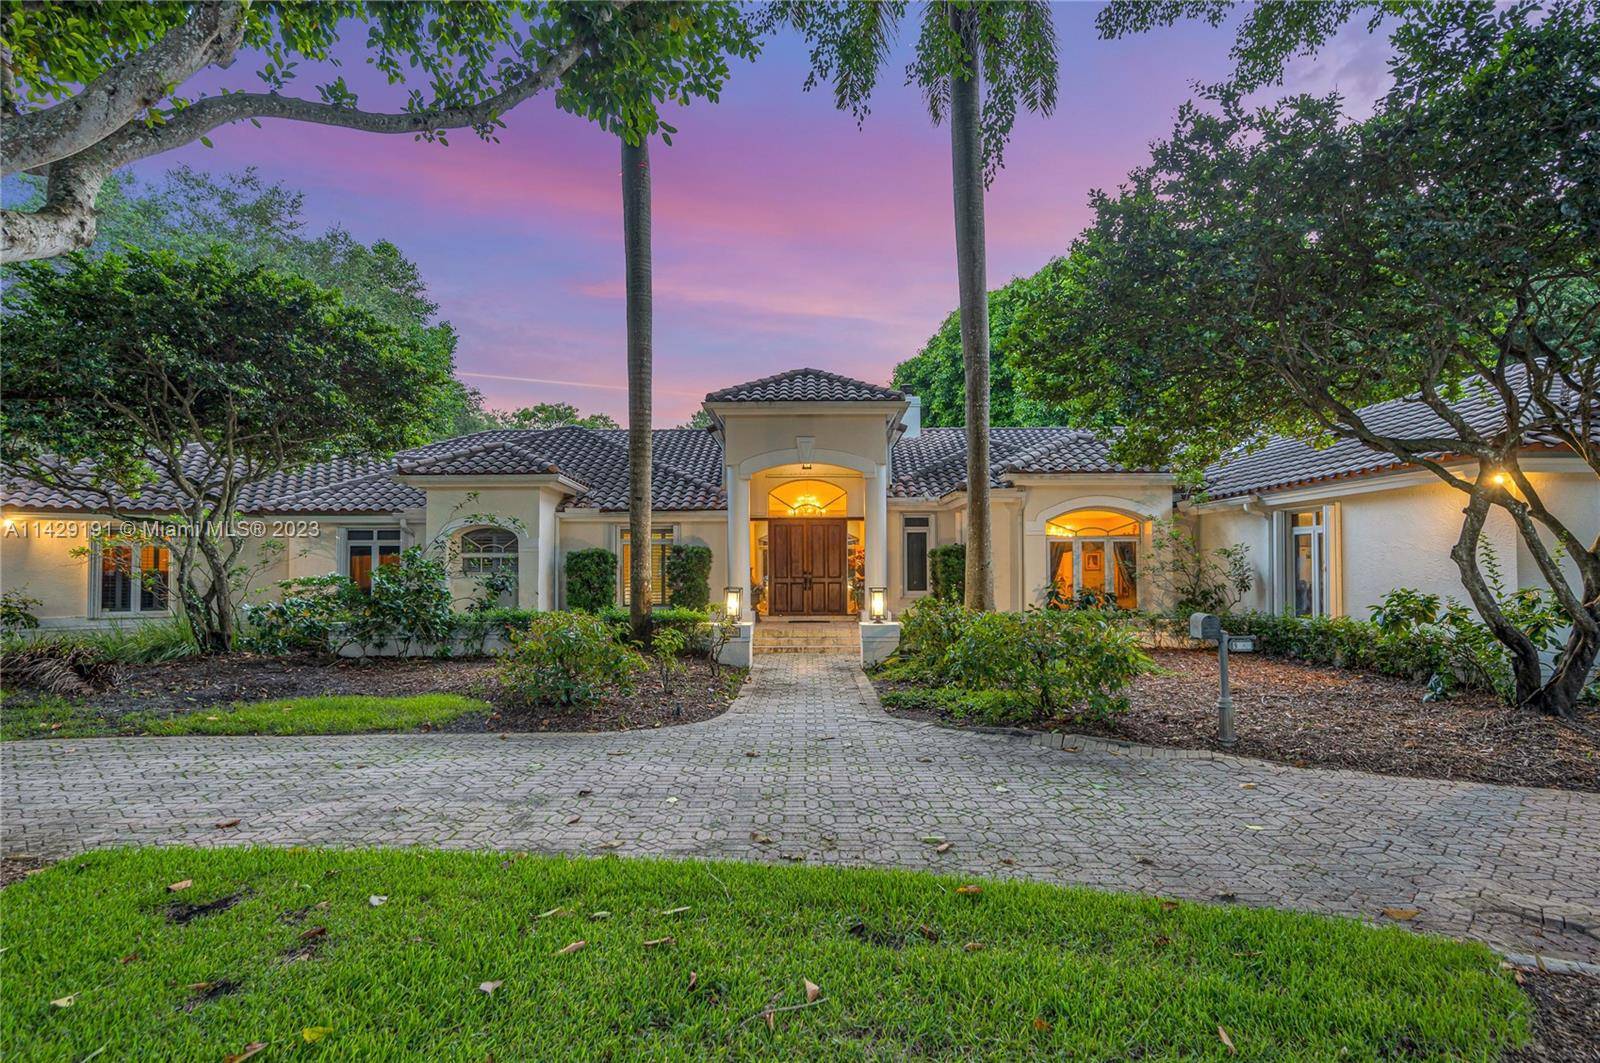 Luxurious one story estate located on the most charming and picturesque street in North Pinecrest.